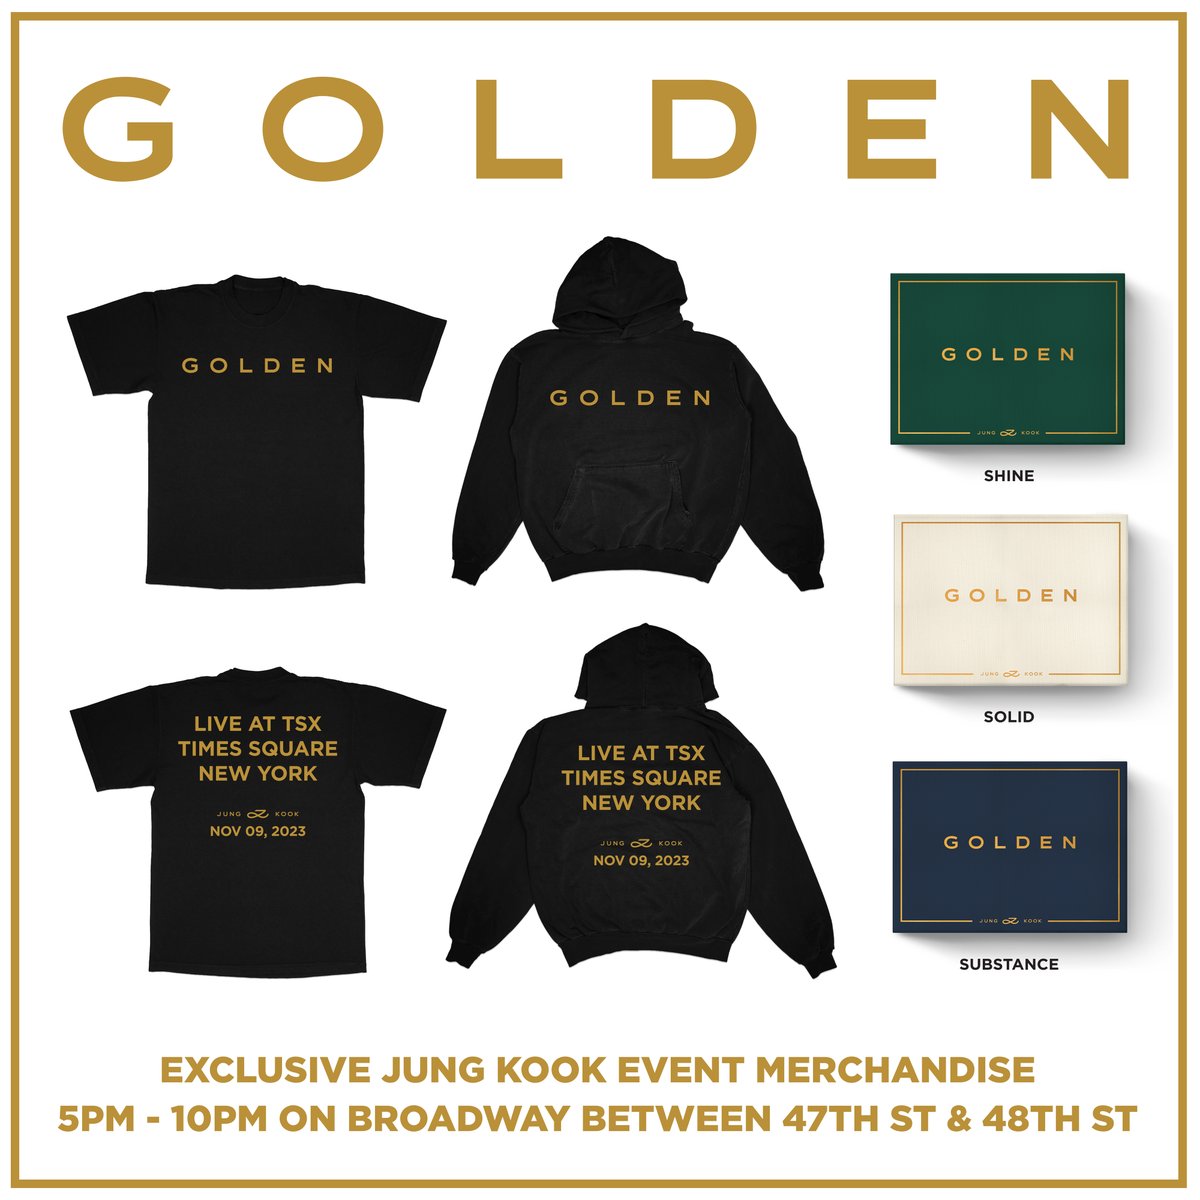 New York City ARMY! You can now purchase limited edition Jung Kook merch and ‘GOLDEN’ physical albums now at the @NTWRKLIVE merch truck in Times Square! ✨ Get them while you can! @bts_bighit